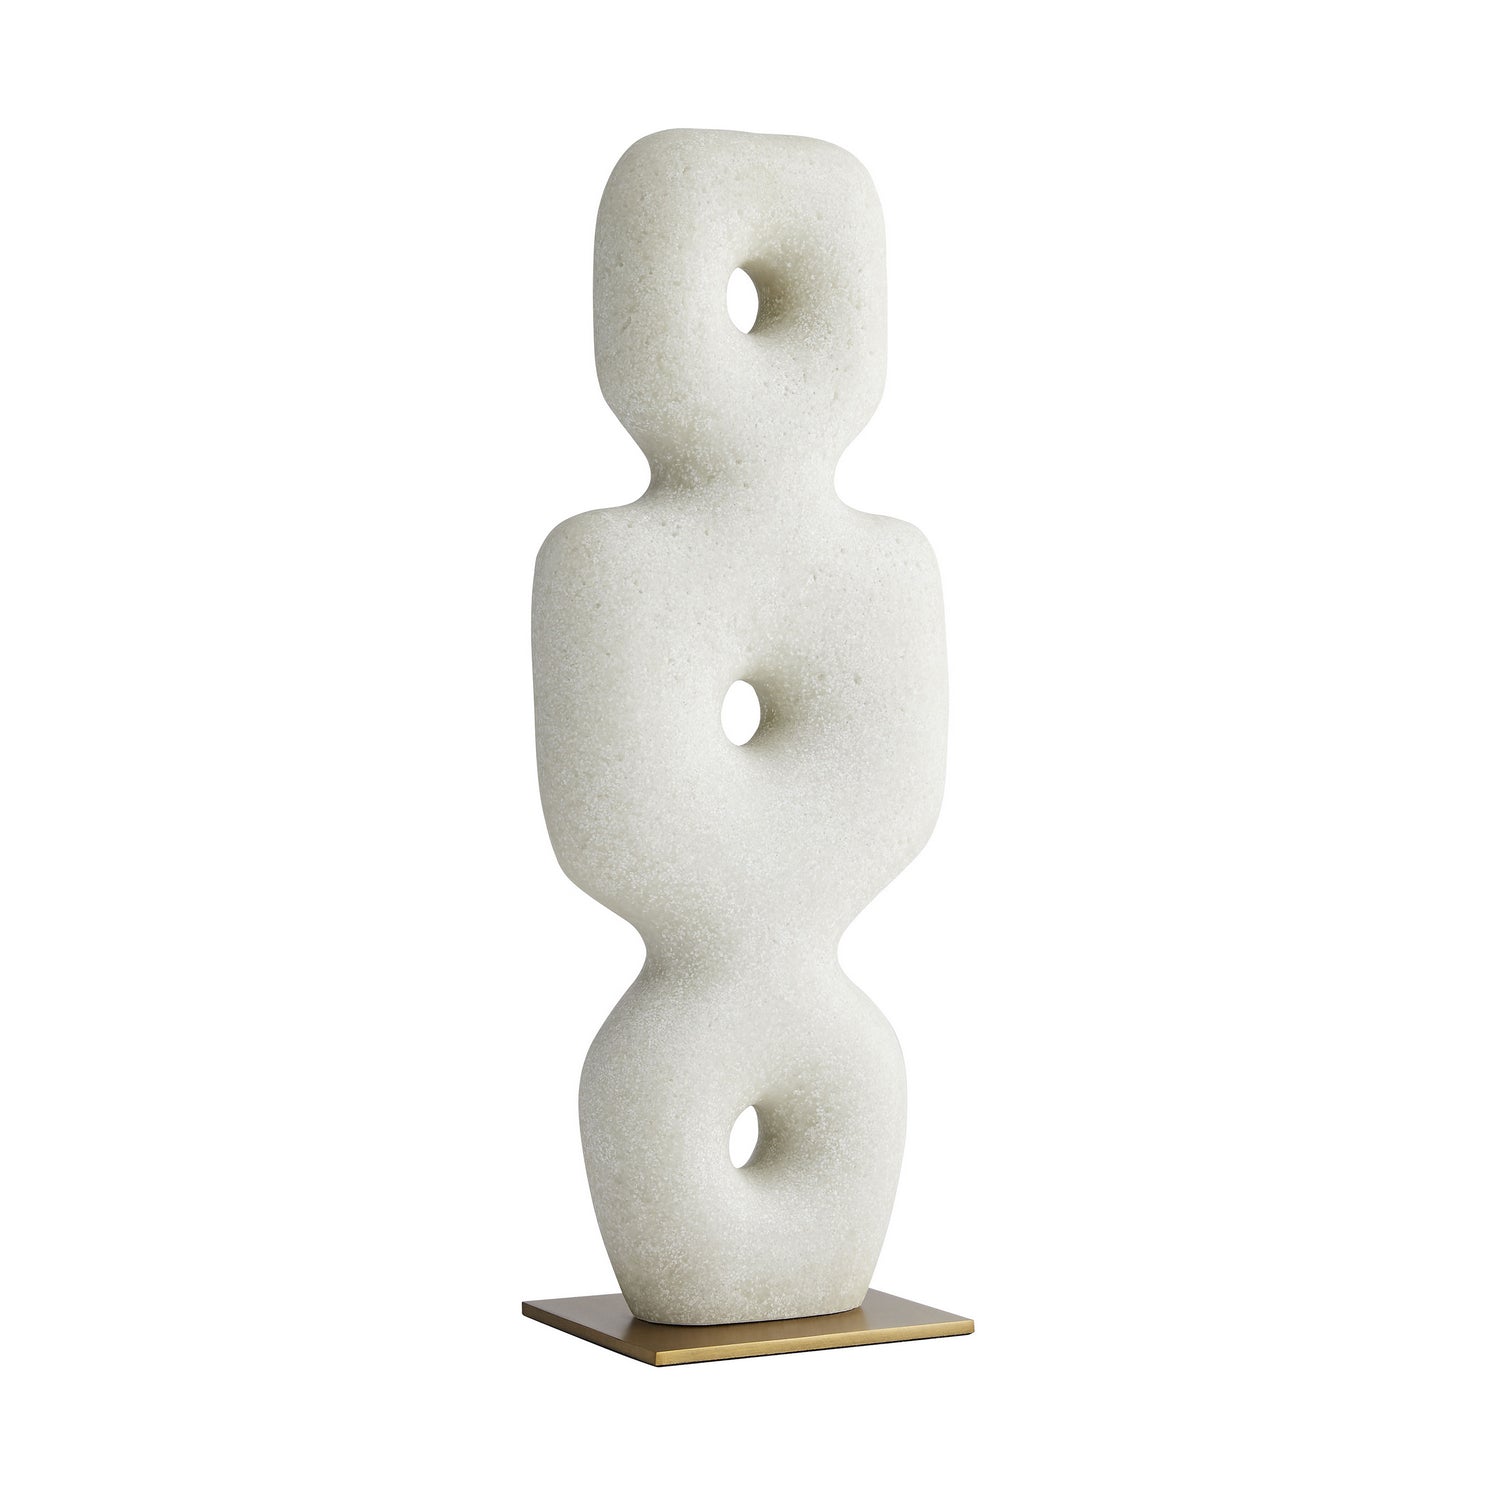 Sculpture from the Aspen collection in White finish